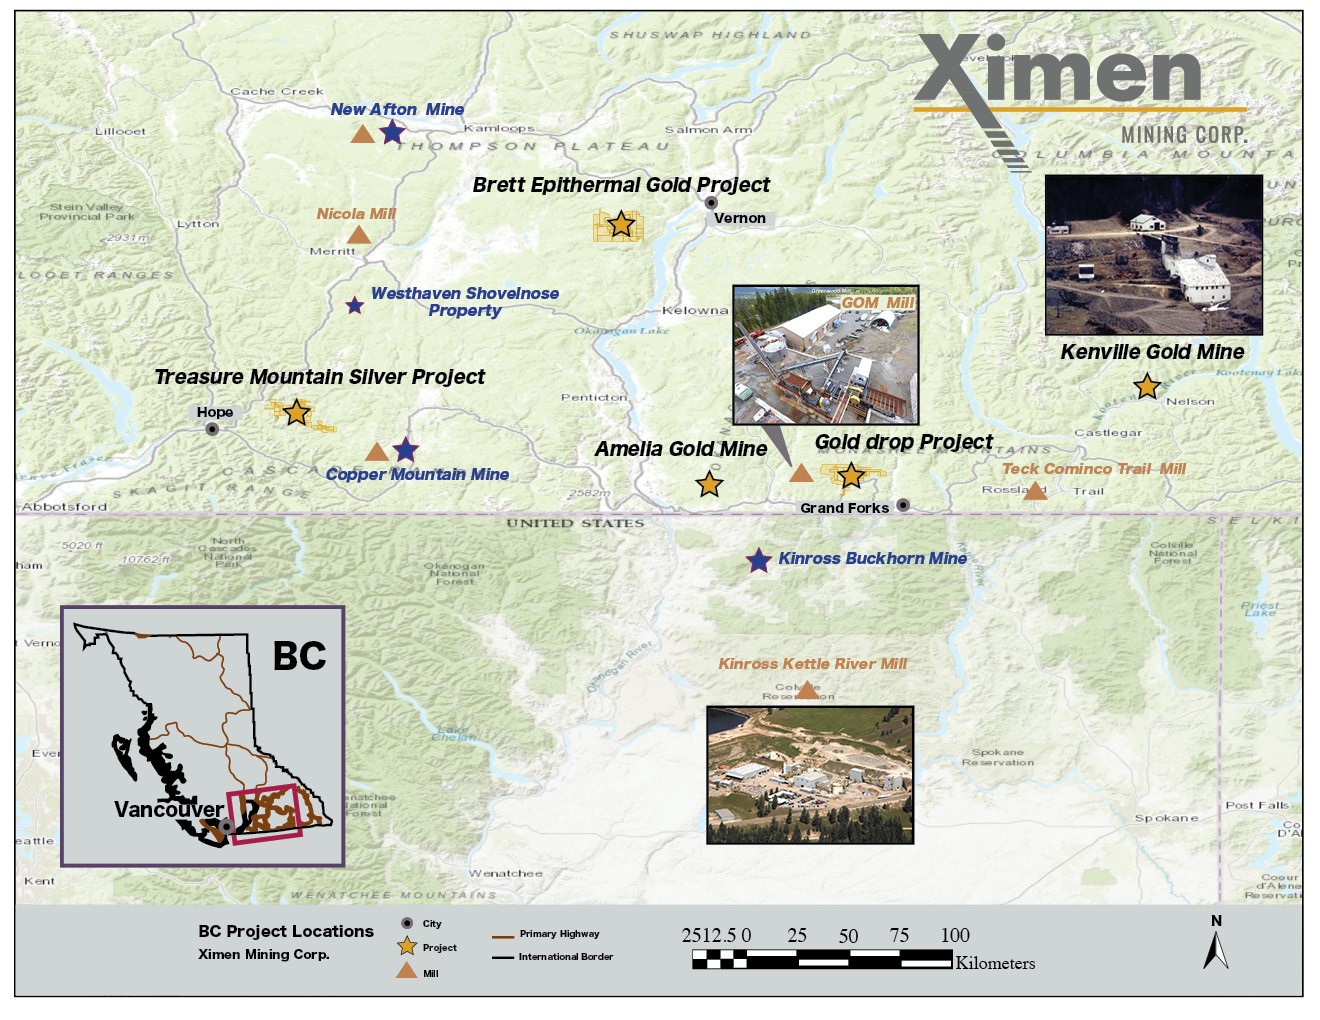 Ximen Mining Corp., Friday, August 23, 2019, Press release picture